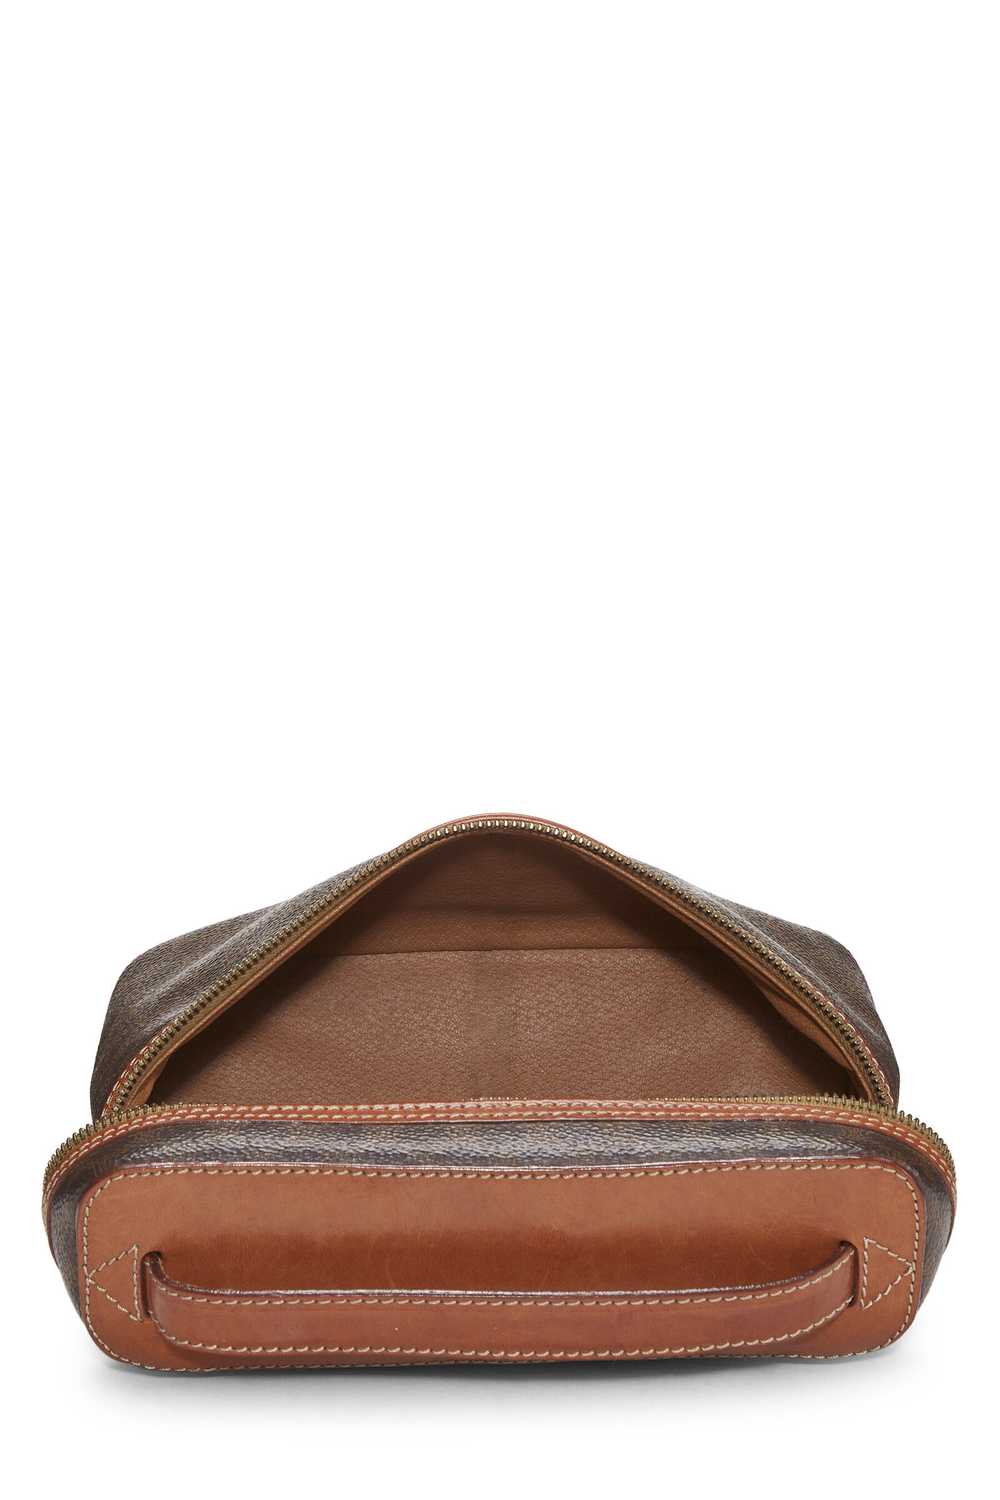 Brown Coated Canvas Macadam Toiletry Bag - image 6